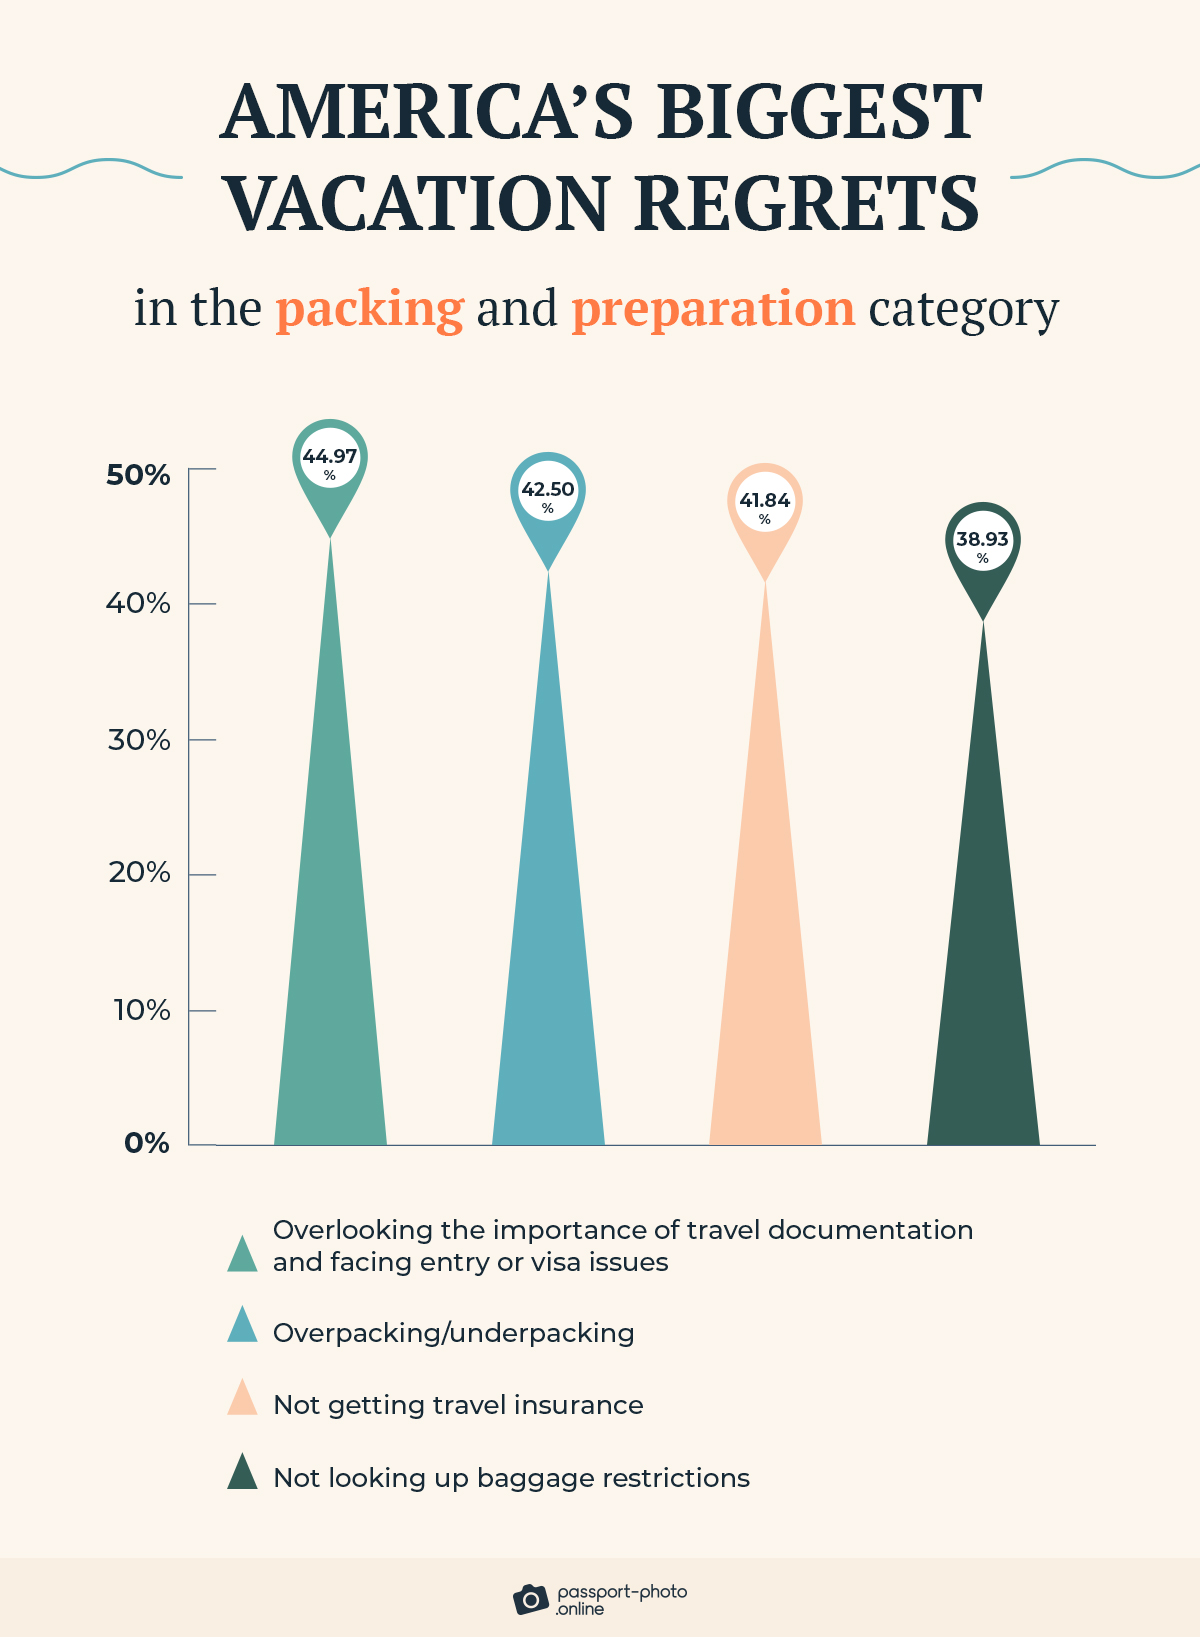 ranking of the biggest vacation regrets in the packing and preparation category